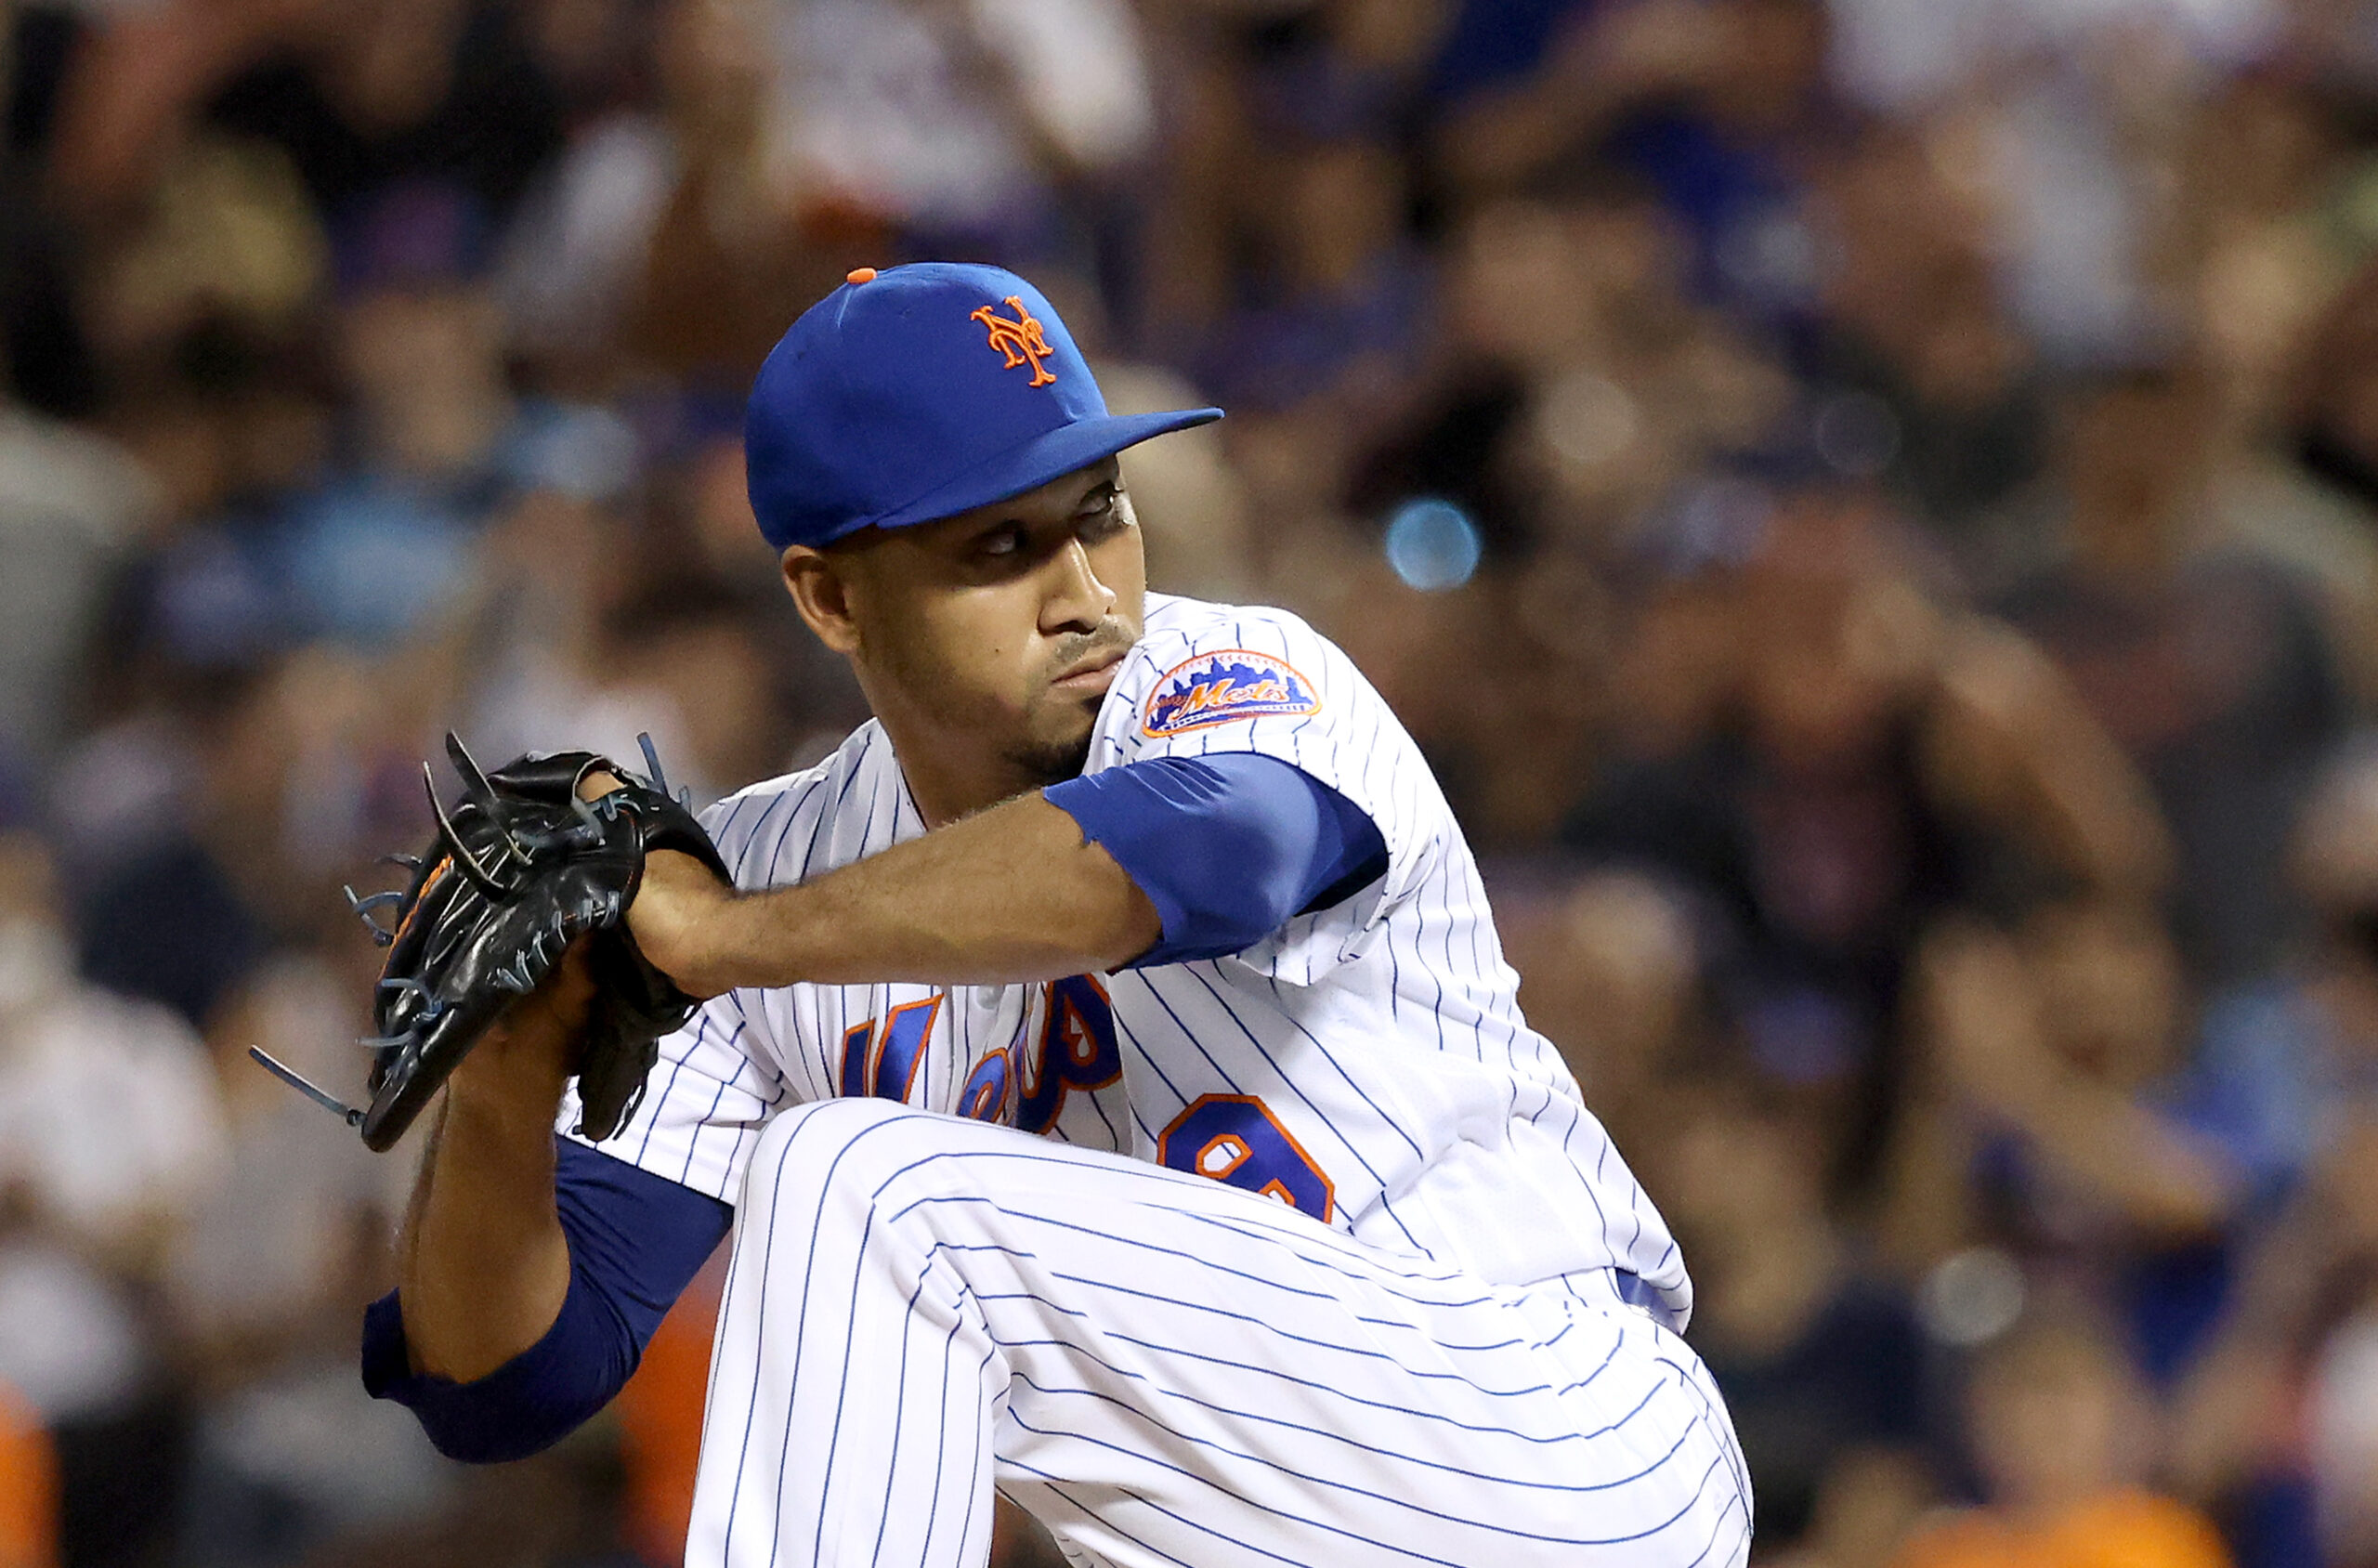 Mets' Edwin Diaz needed no music in a dominant two-inning save